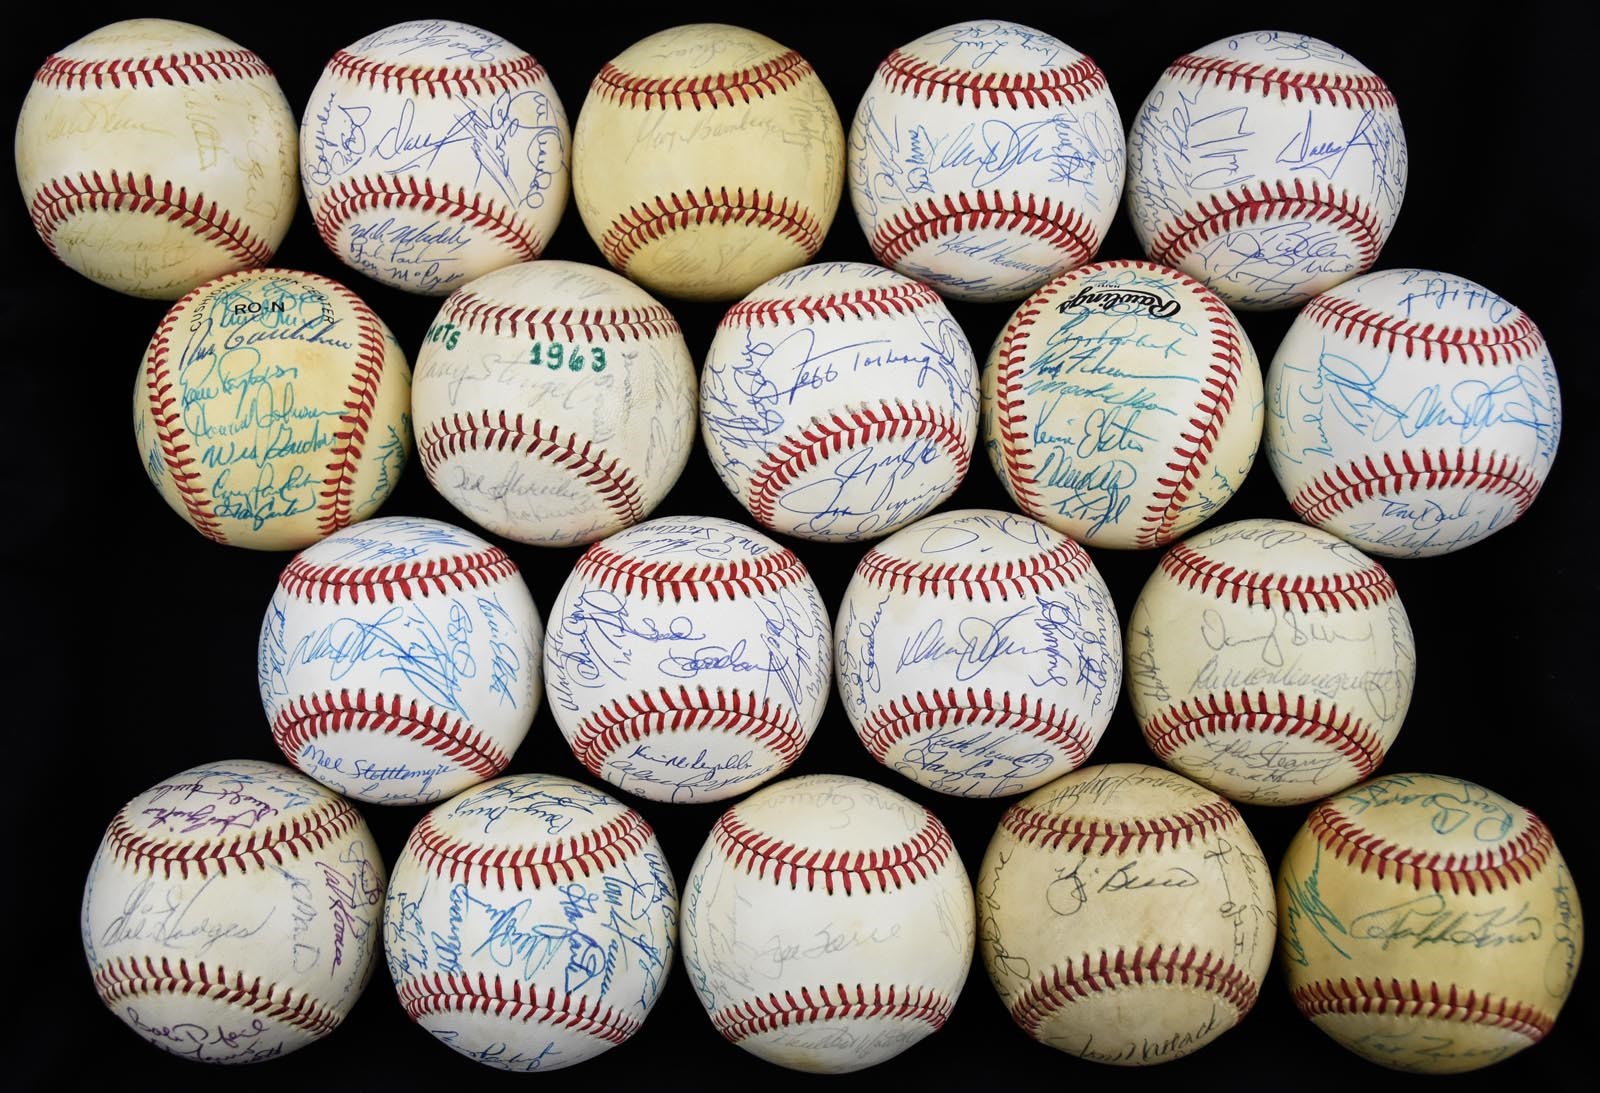 NY Yankees, Giants & Mets - 1963-95 New York Mets Team Signed Baseball Partial Run w/1969 & 1986 World Champs (19)